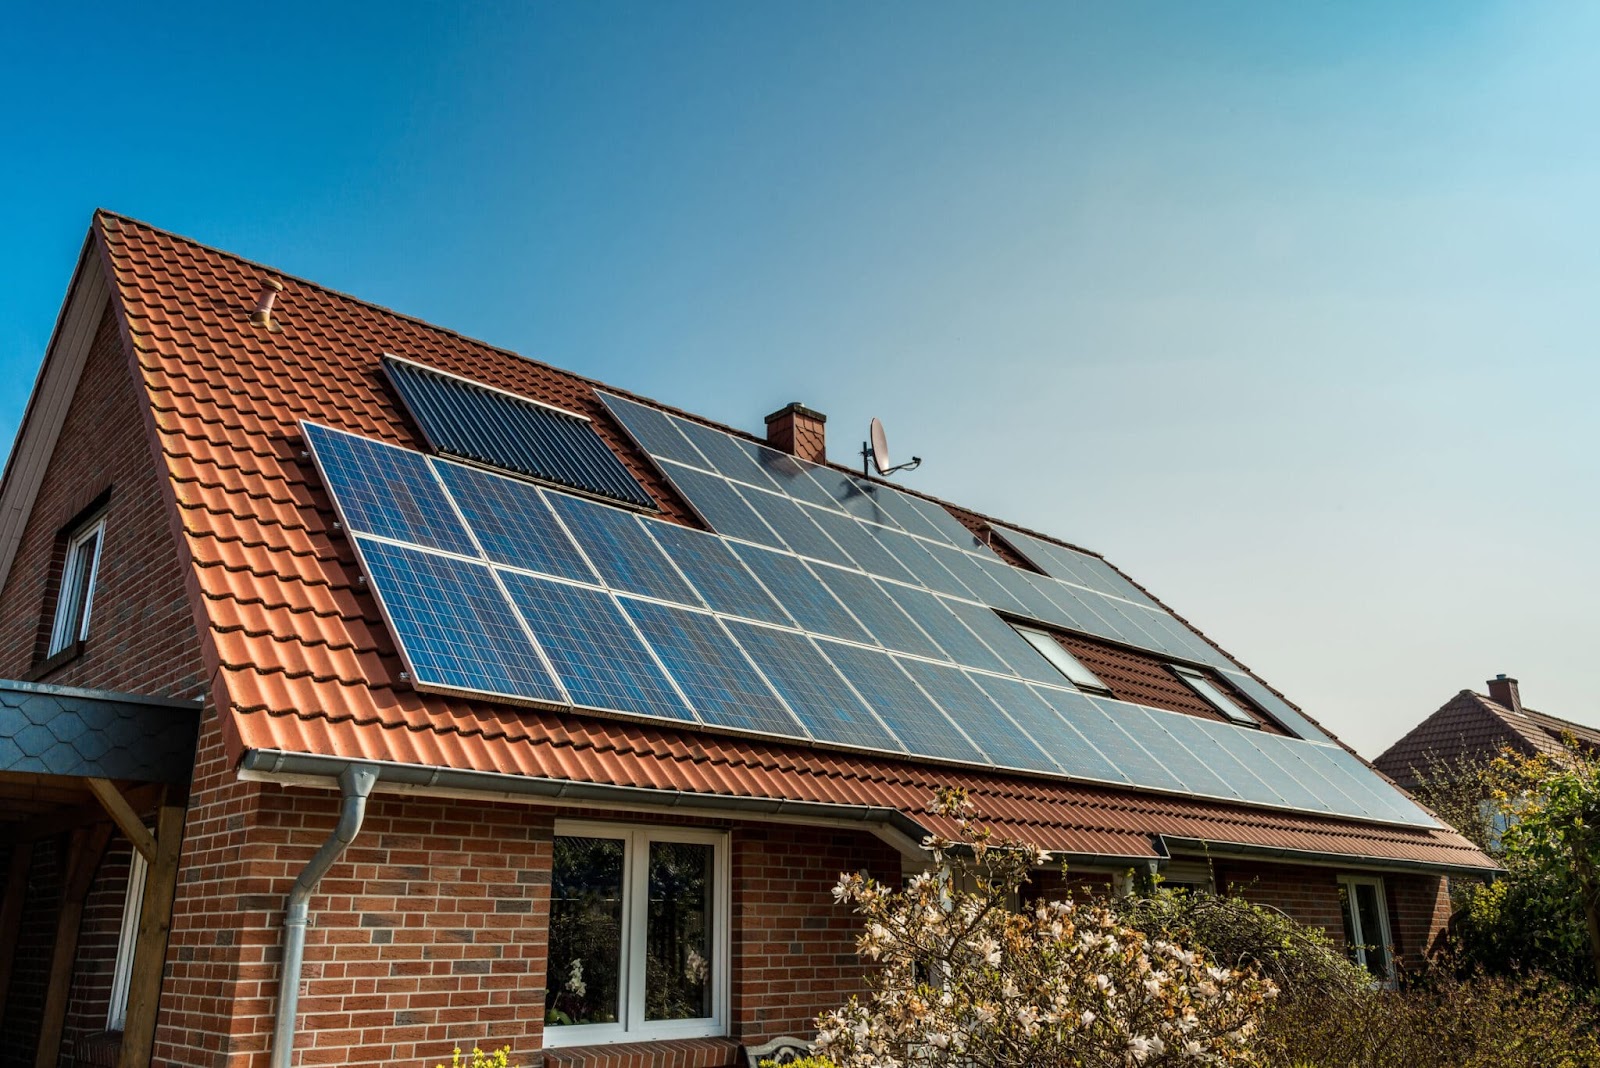 Consider Your Home’s Solar Potential